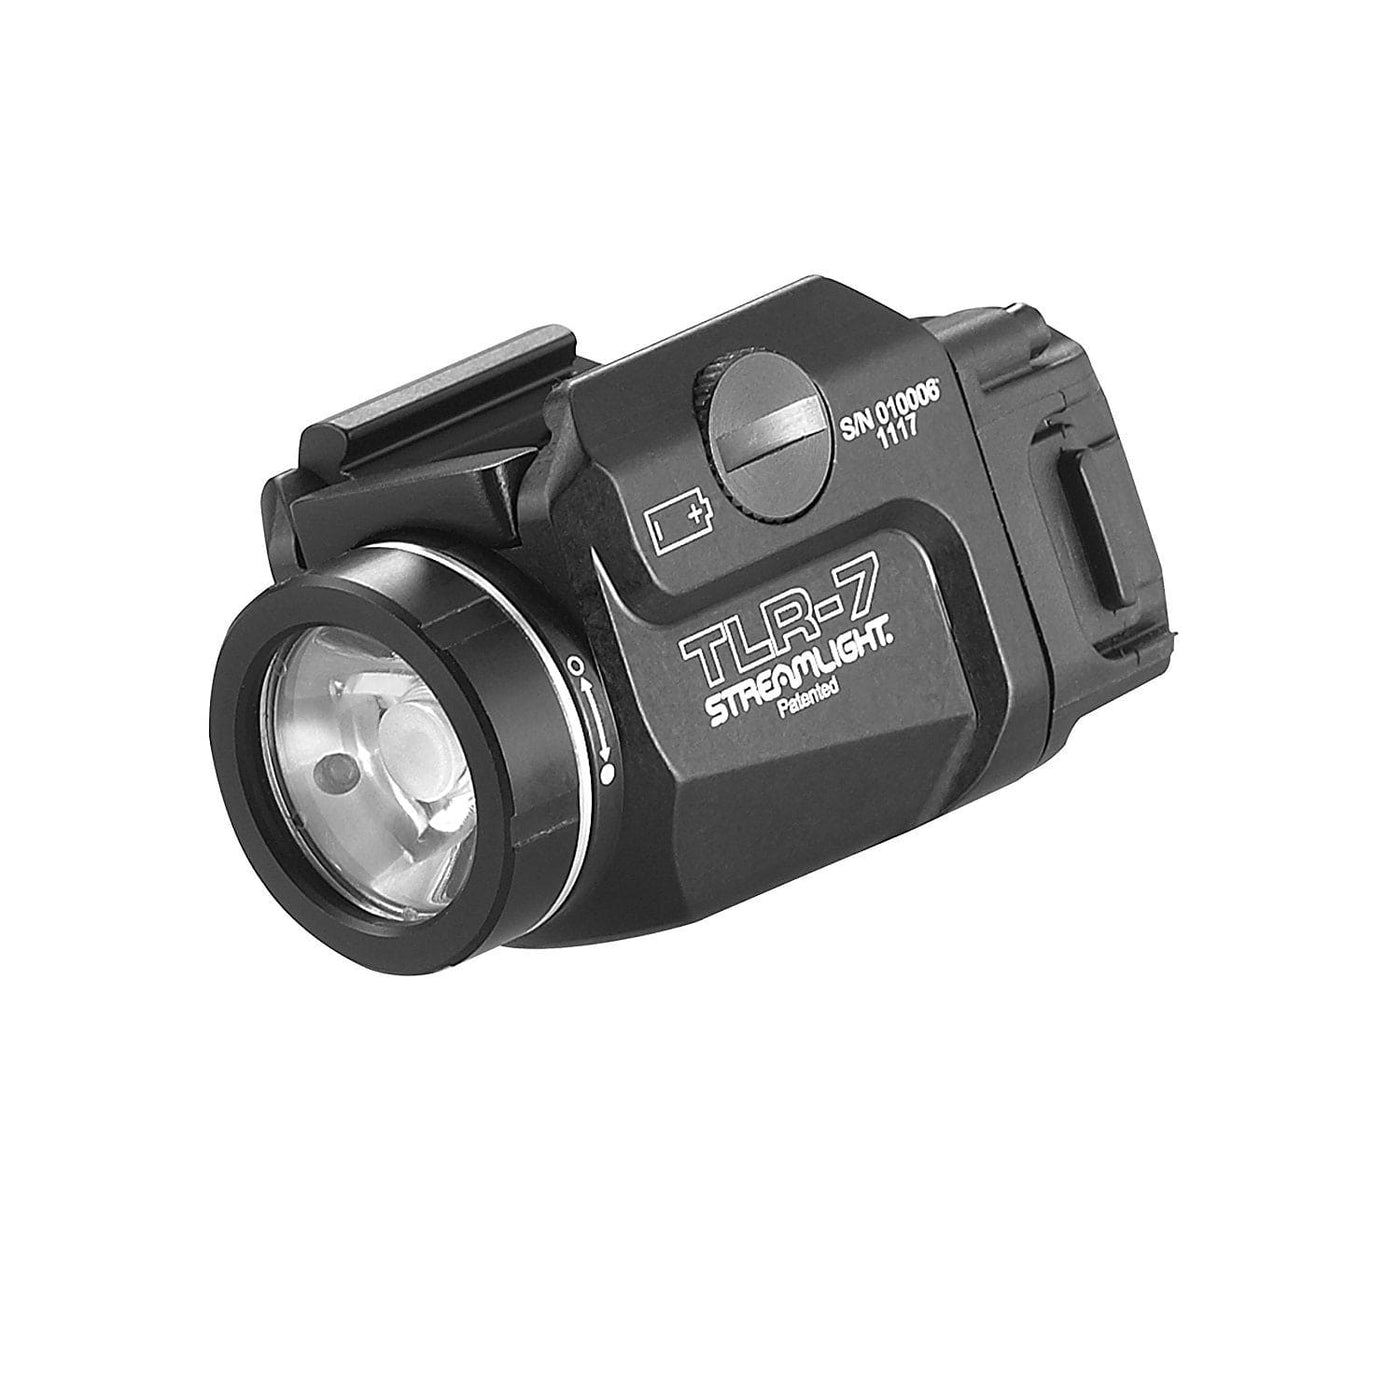 Streamlight Streamlight TLR-7 Low Profile Rail Mounted Tactical Light Lights